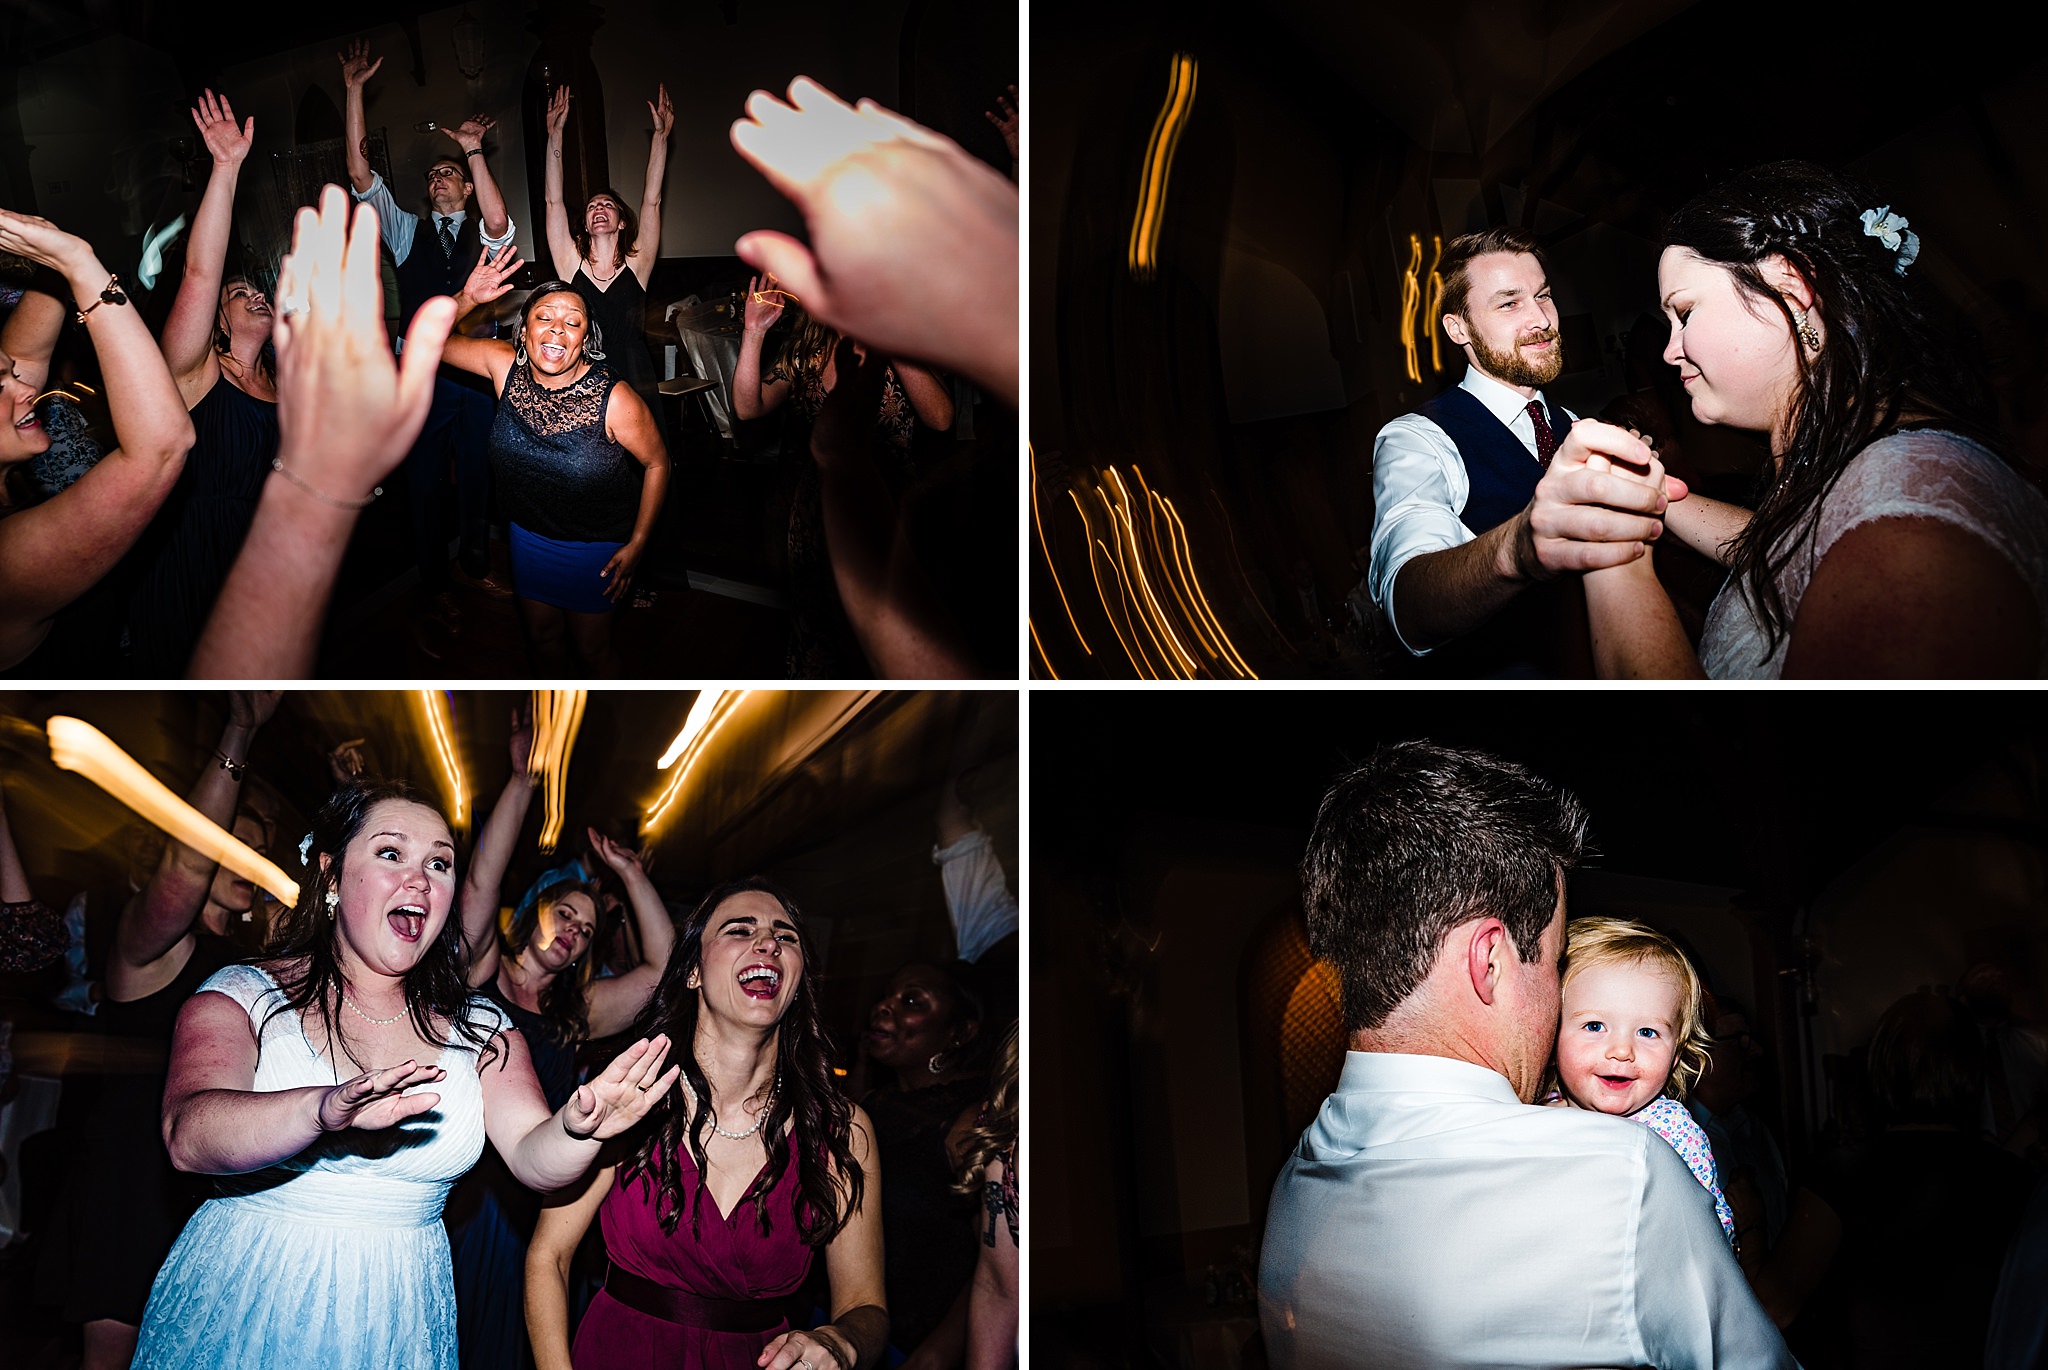 The bride and groom and their guests have fun on the dance floor during this All Saints Chapel Raleigh wedding